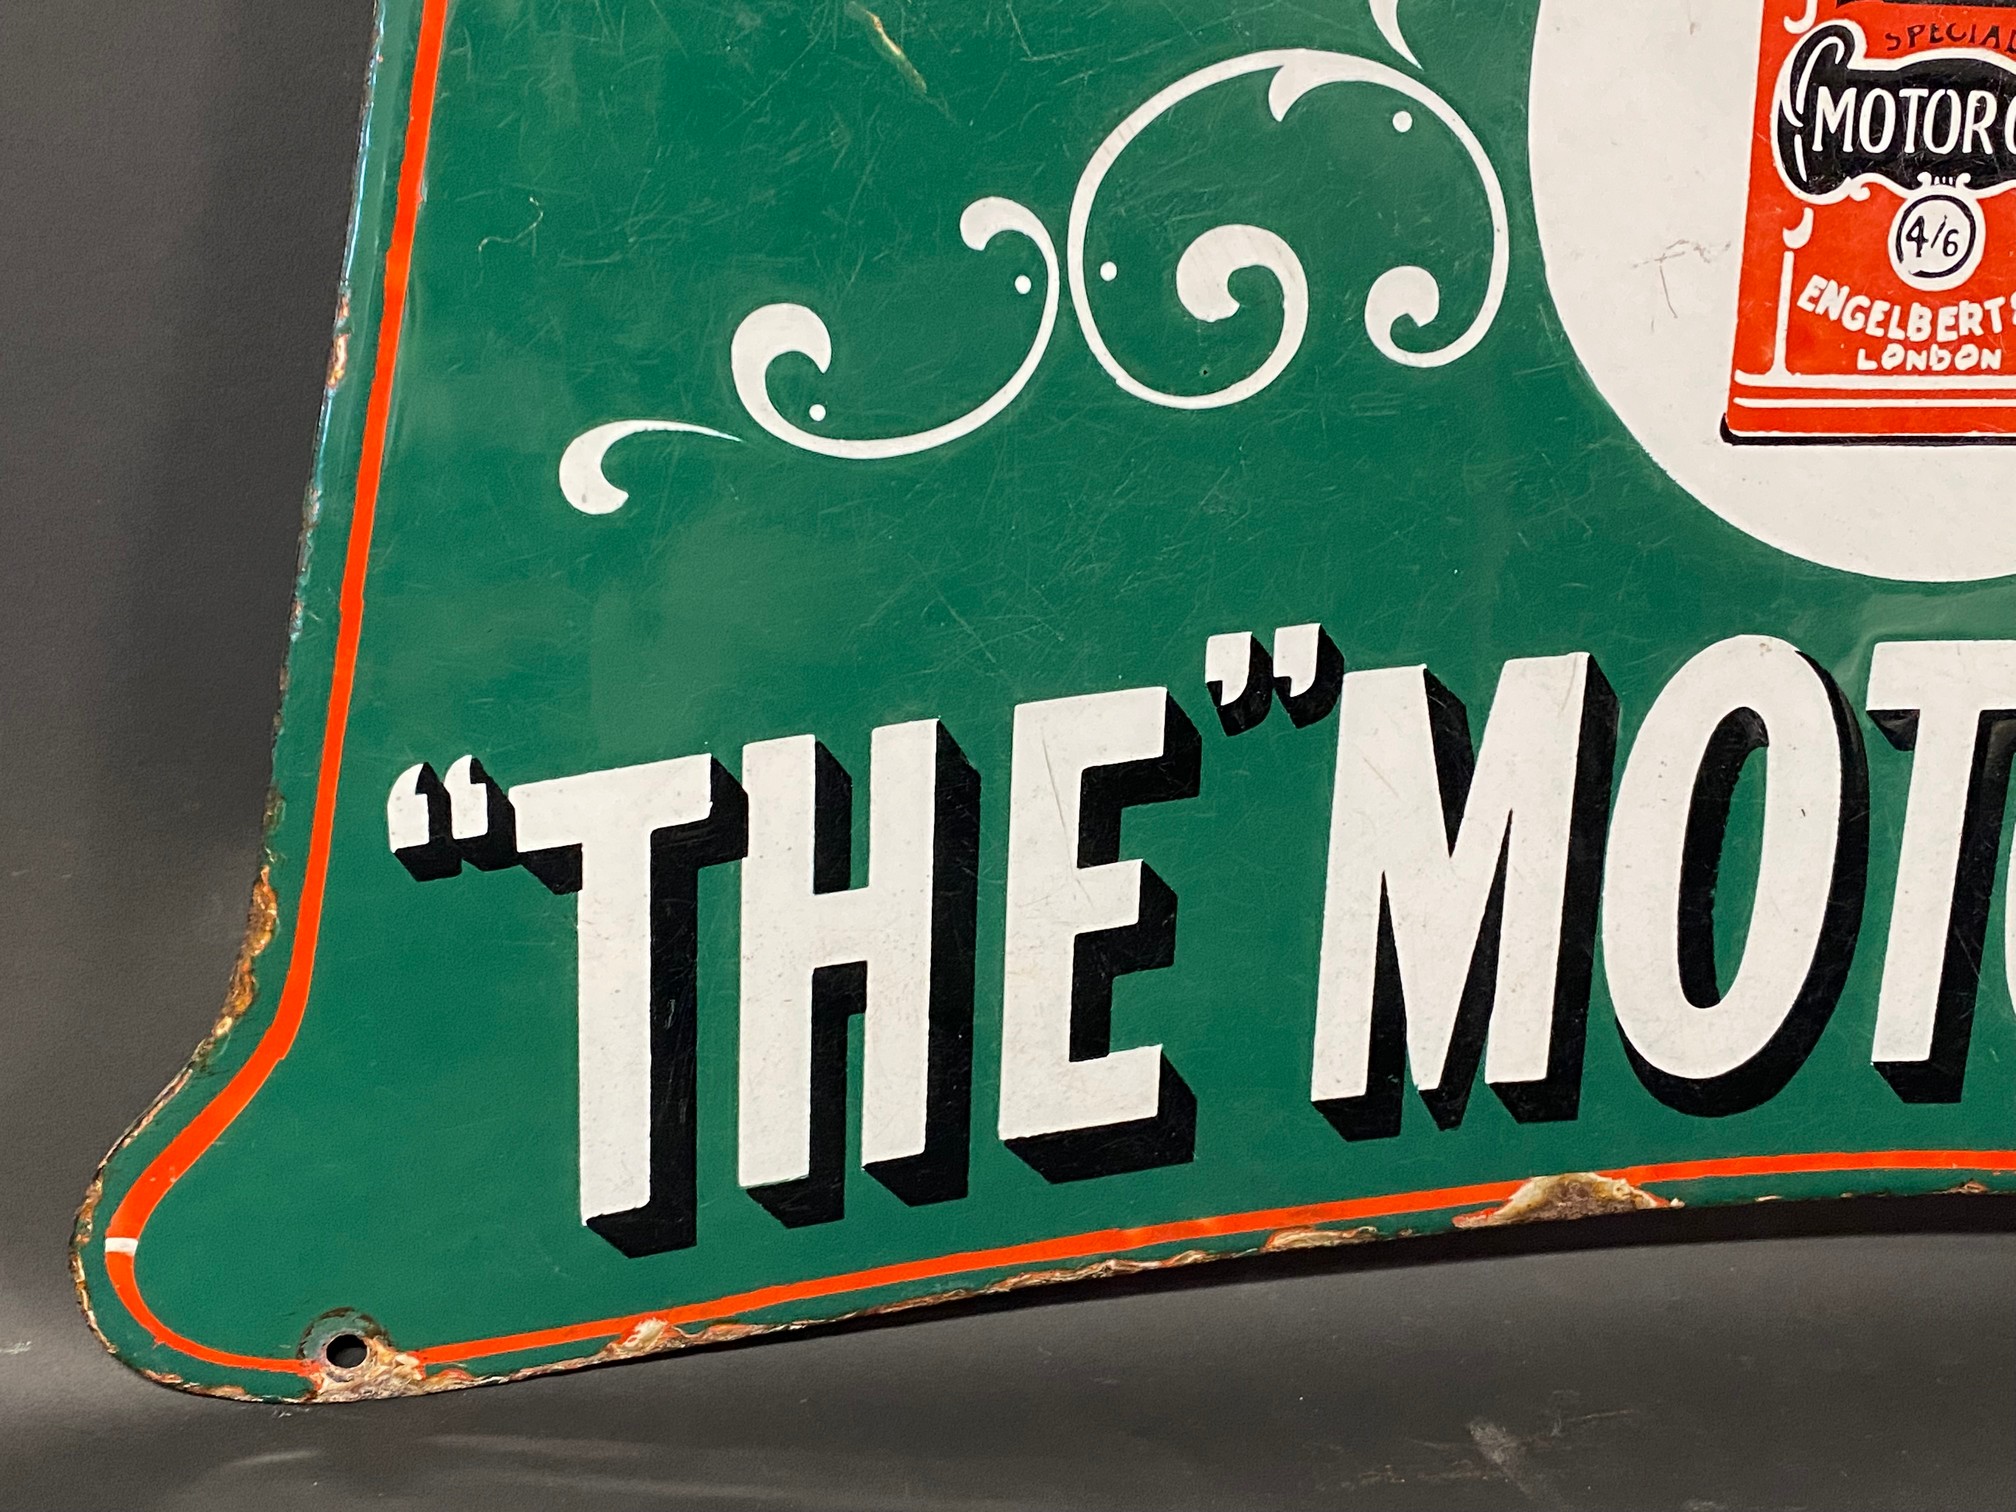 A very rare Engelbert's 'The' Motor Oils shaped double sided enamel sign with an image of a can to - Image 13 of 13